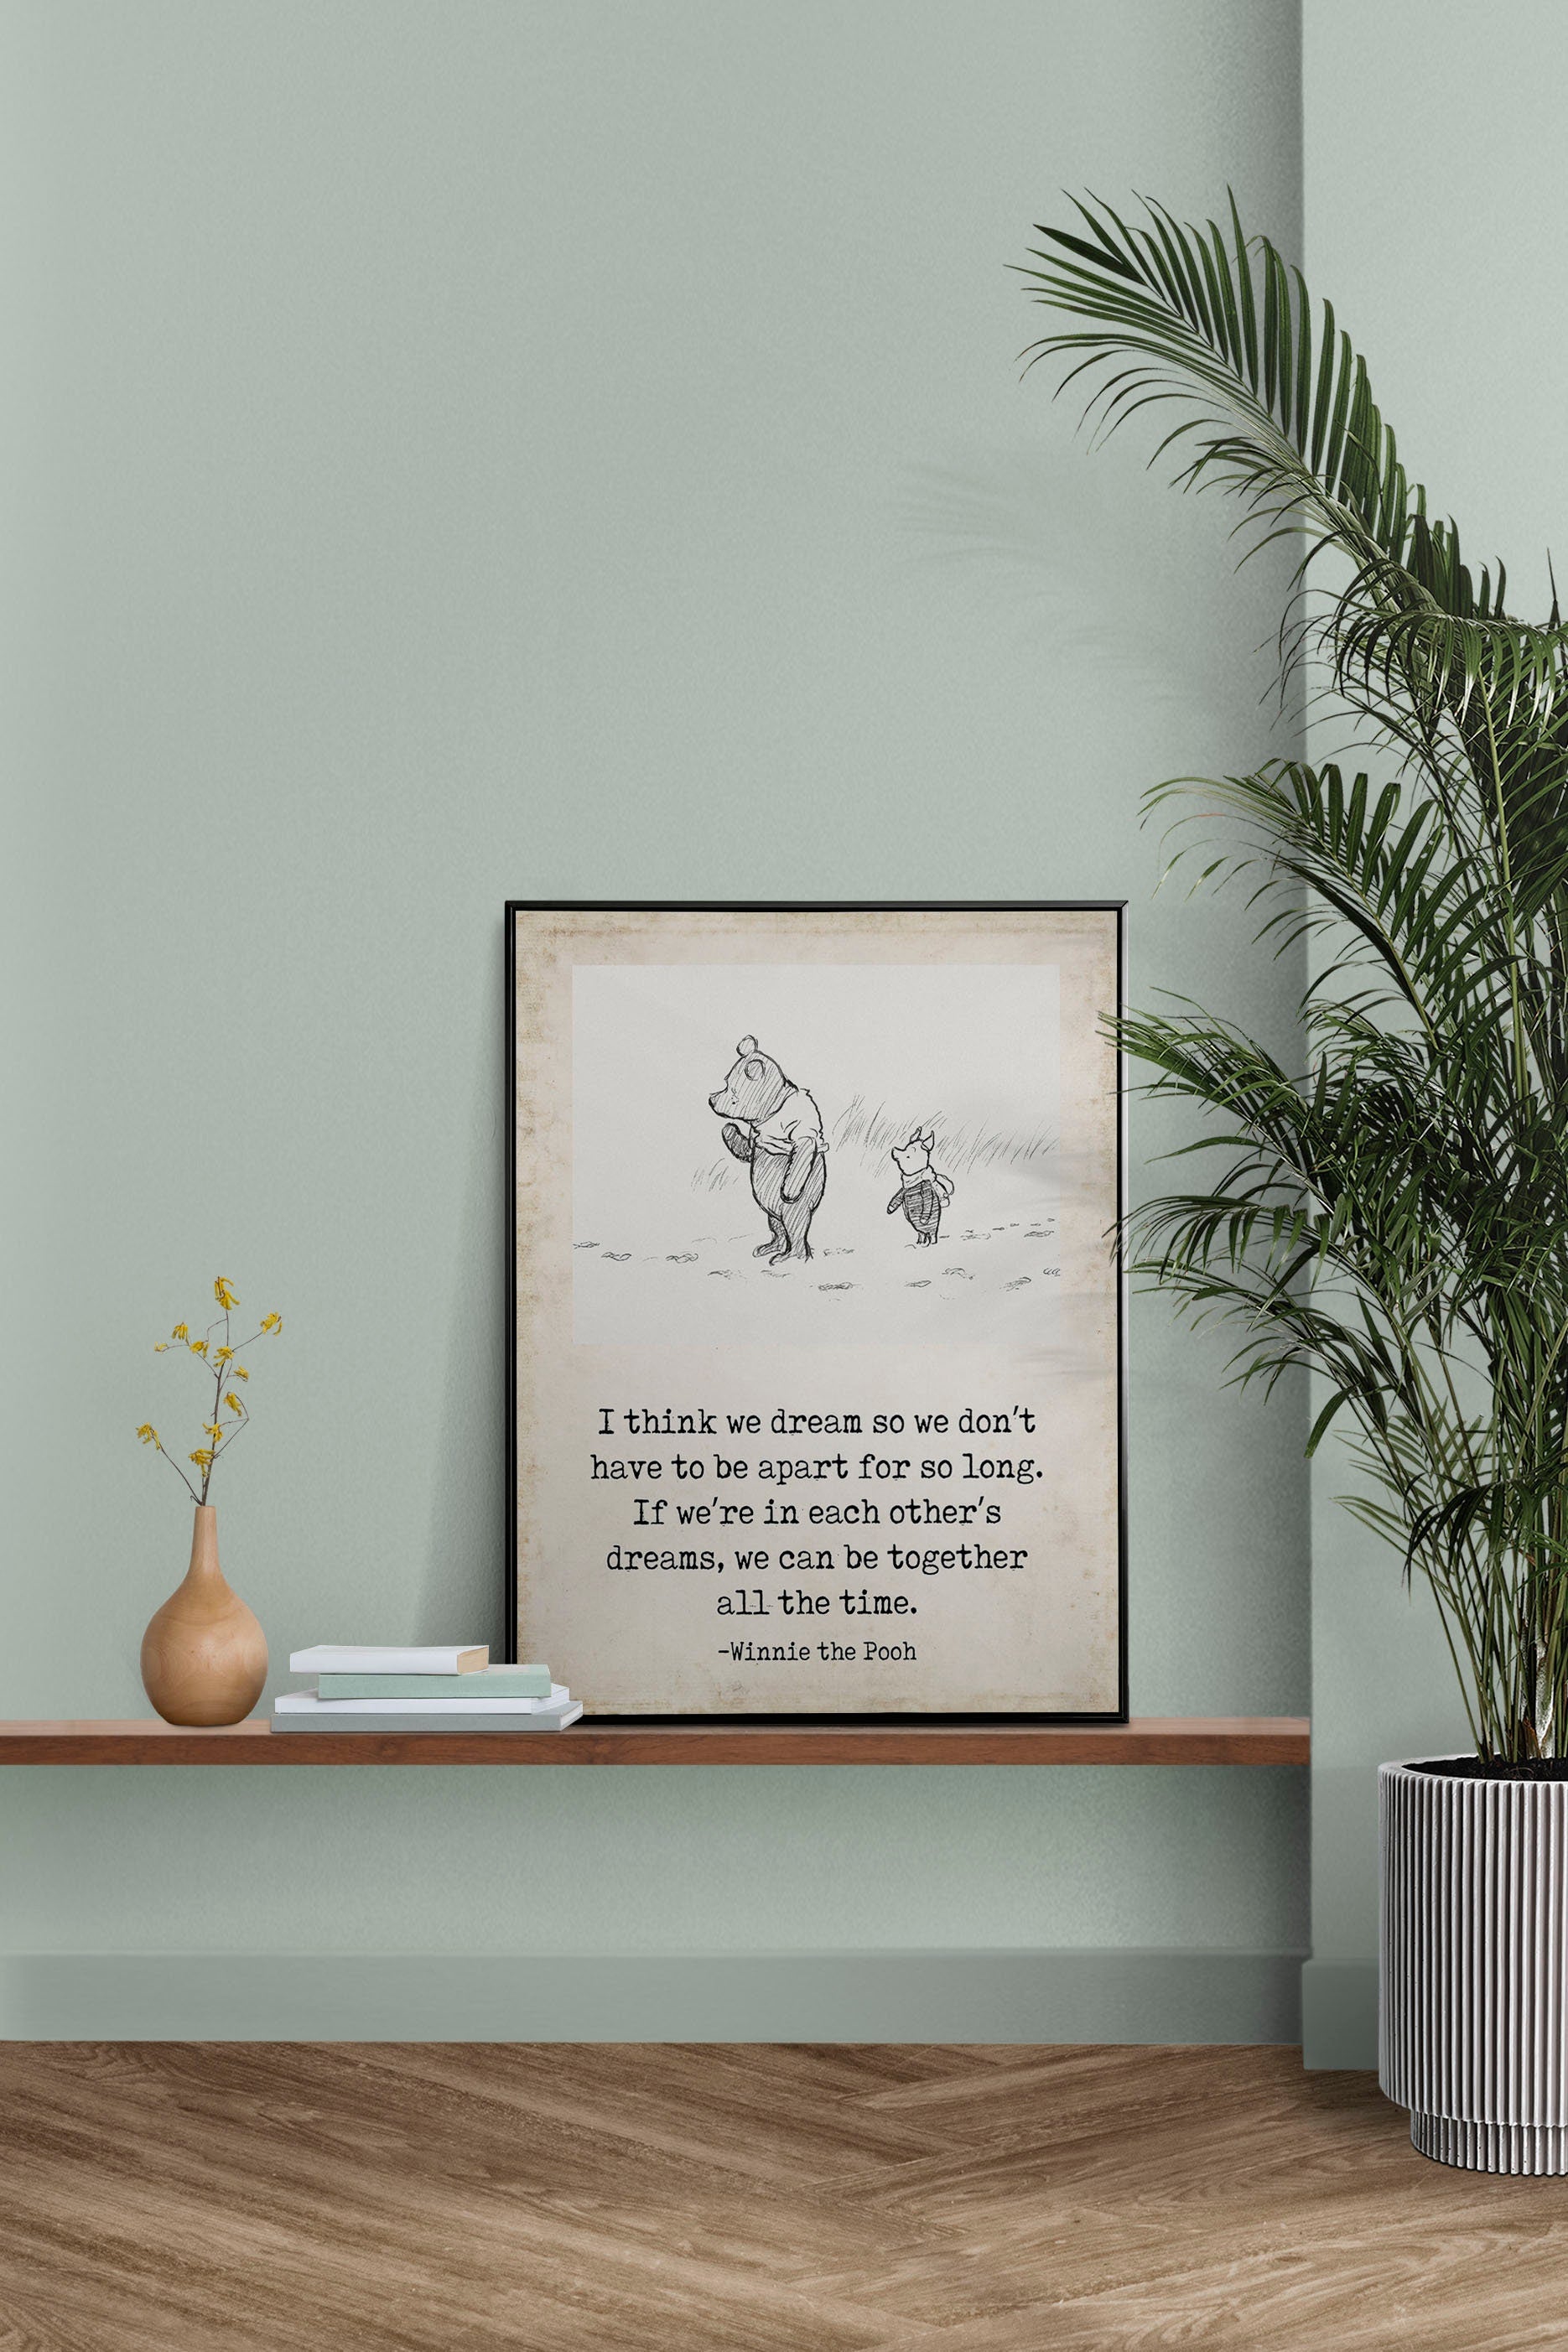 I Think We Dream Winnie the Pooh Quote Unframed or Framed Nursery Wall Art Prints in Vintage Style with Pooh & Piglet Drawing, AA Milne